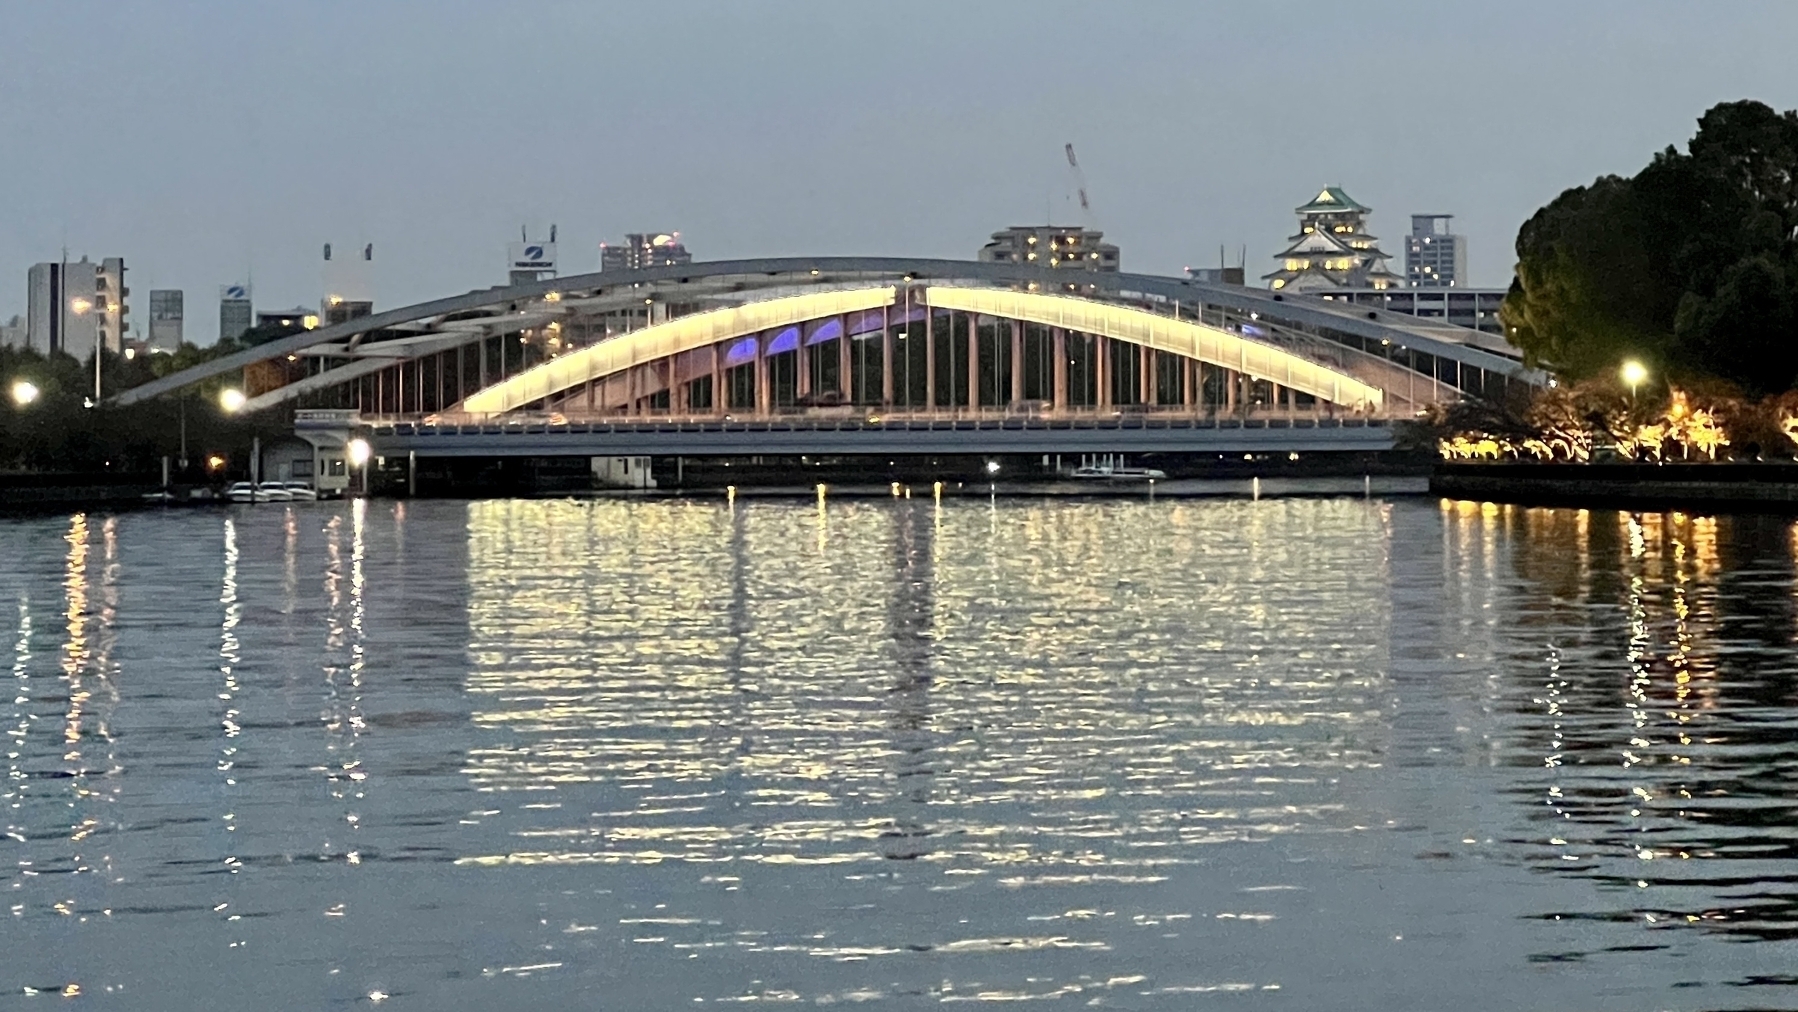 An arched bridge over the river lit up in early evening. In the background distance is Osaka Castle